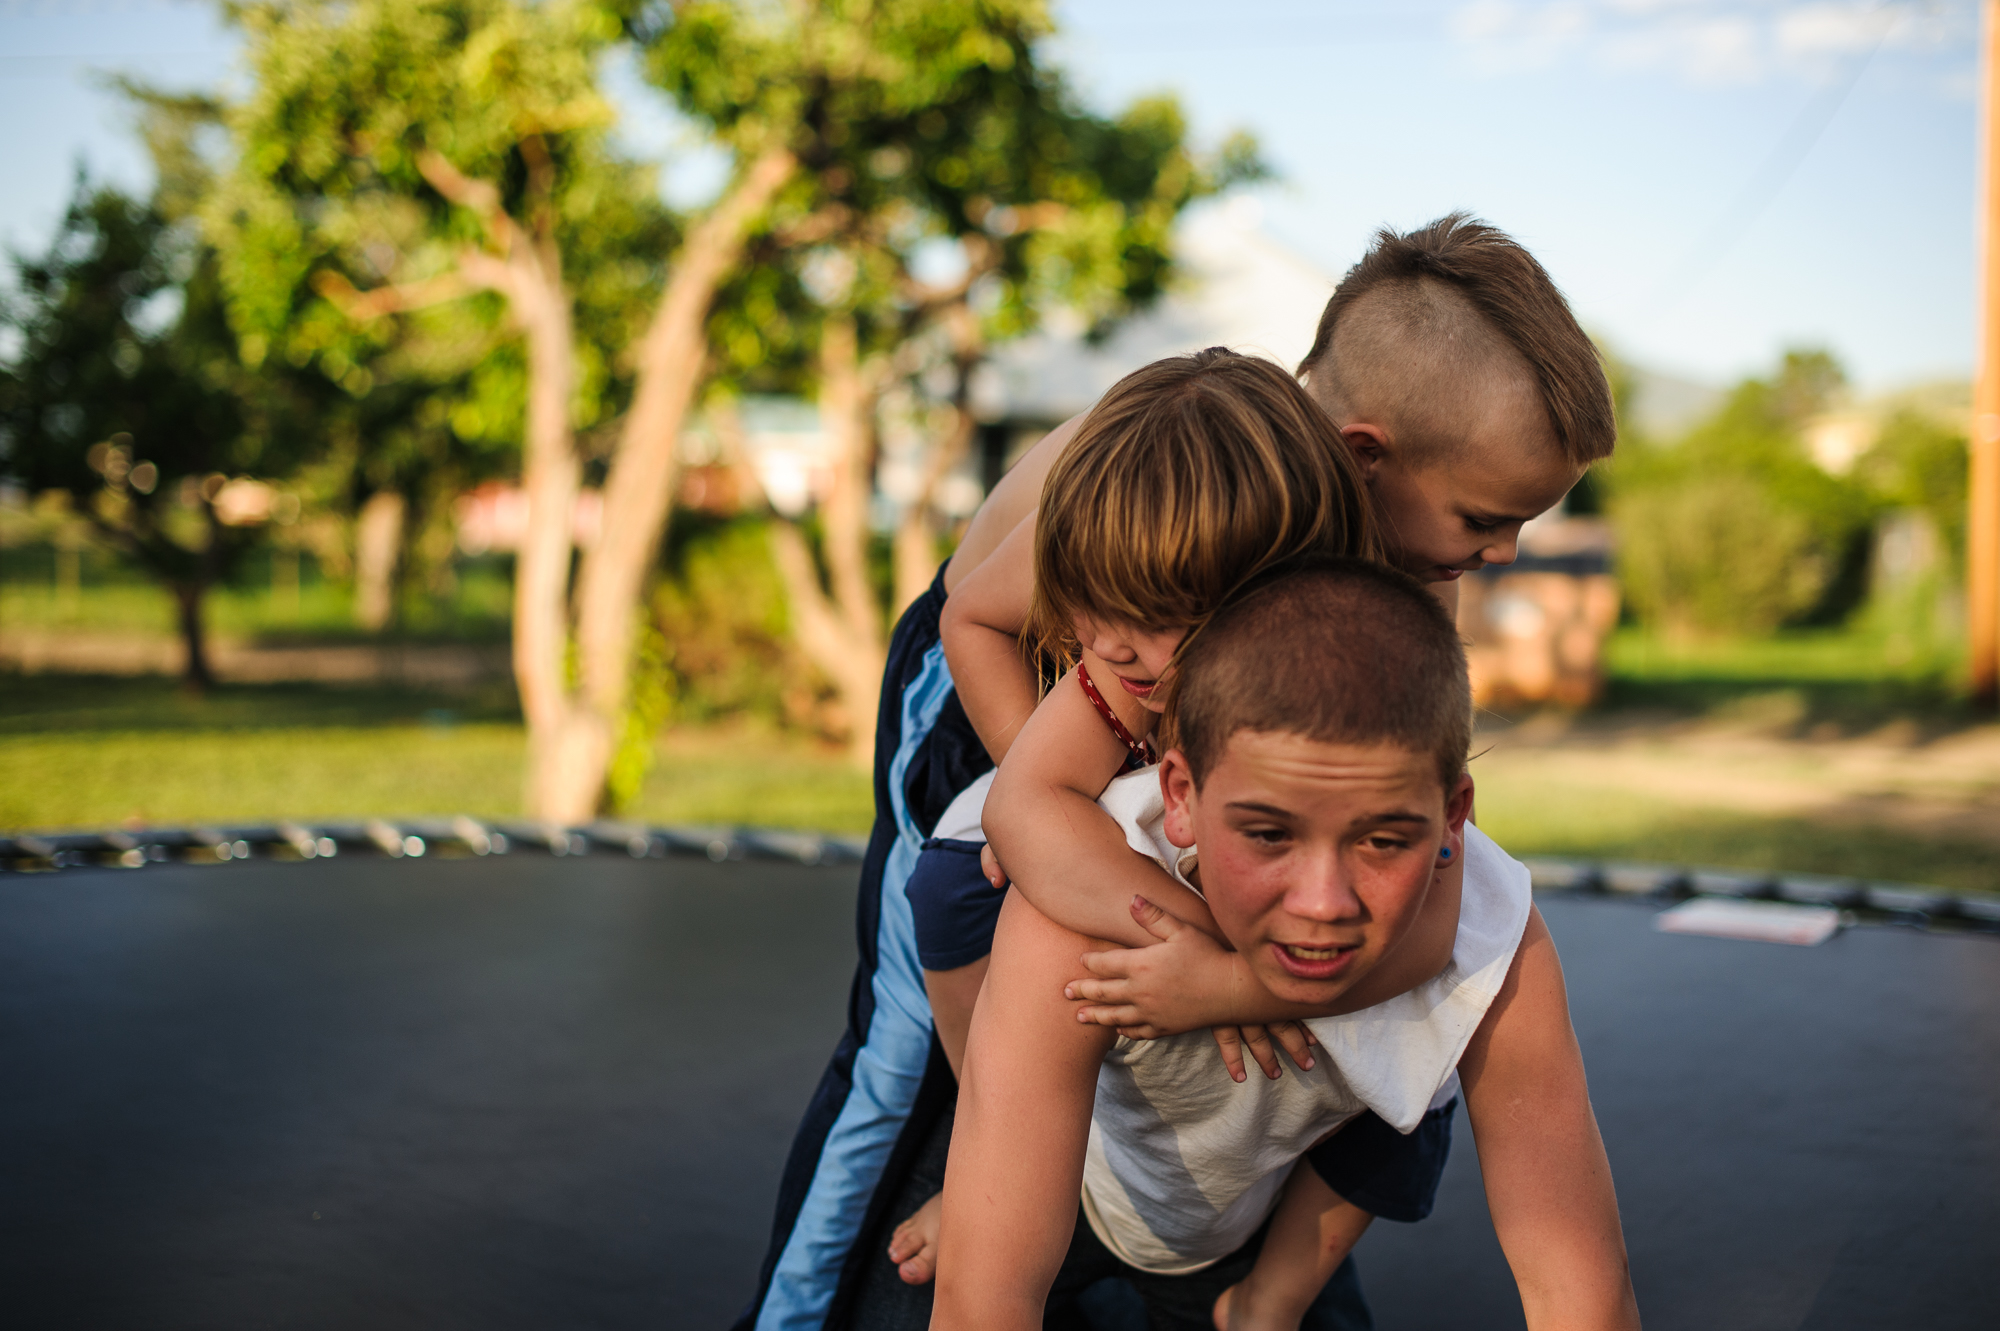  Vinny, age 13, carries his sister and brother on his back on a trampoline at his aunt’s home during an organized family visit, 2012. 